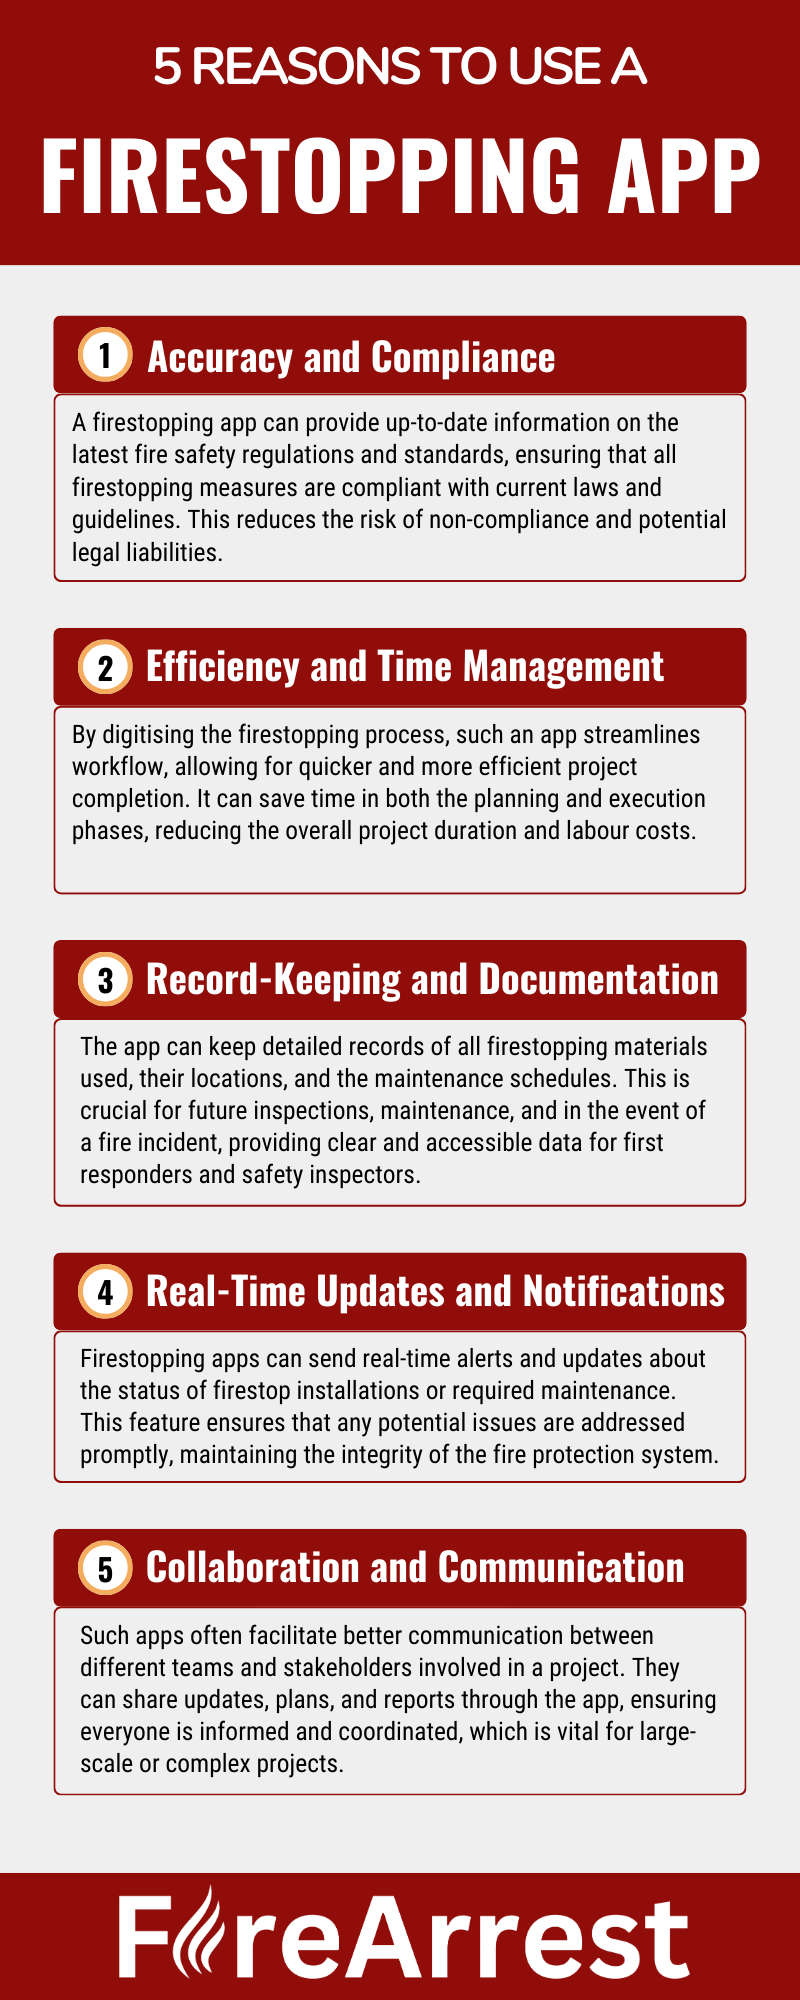 5 Reasons You Should Use a Firestopping App Infographic